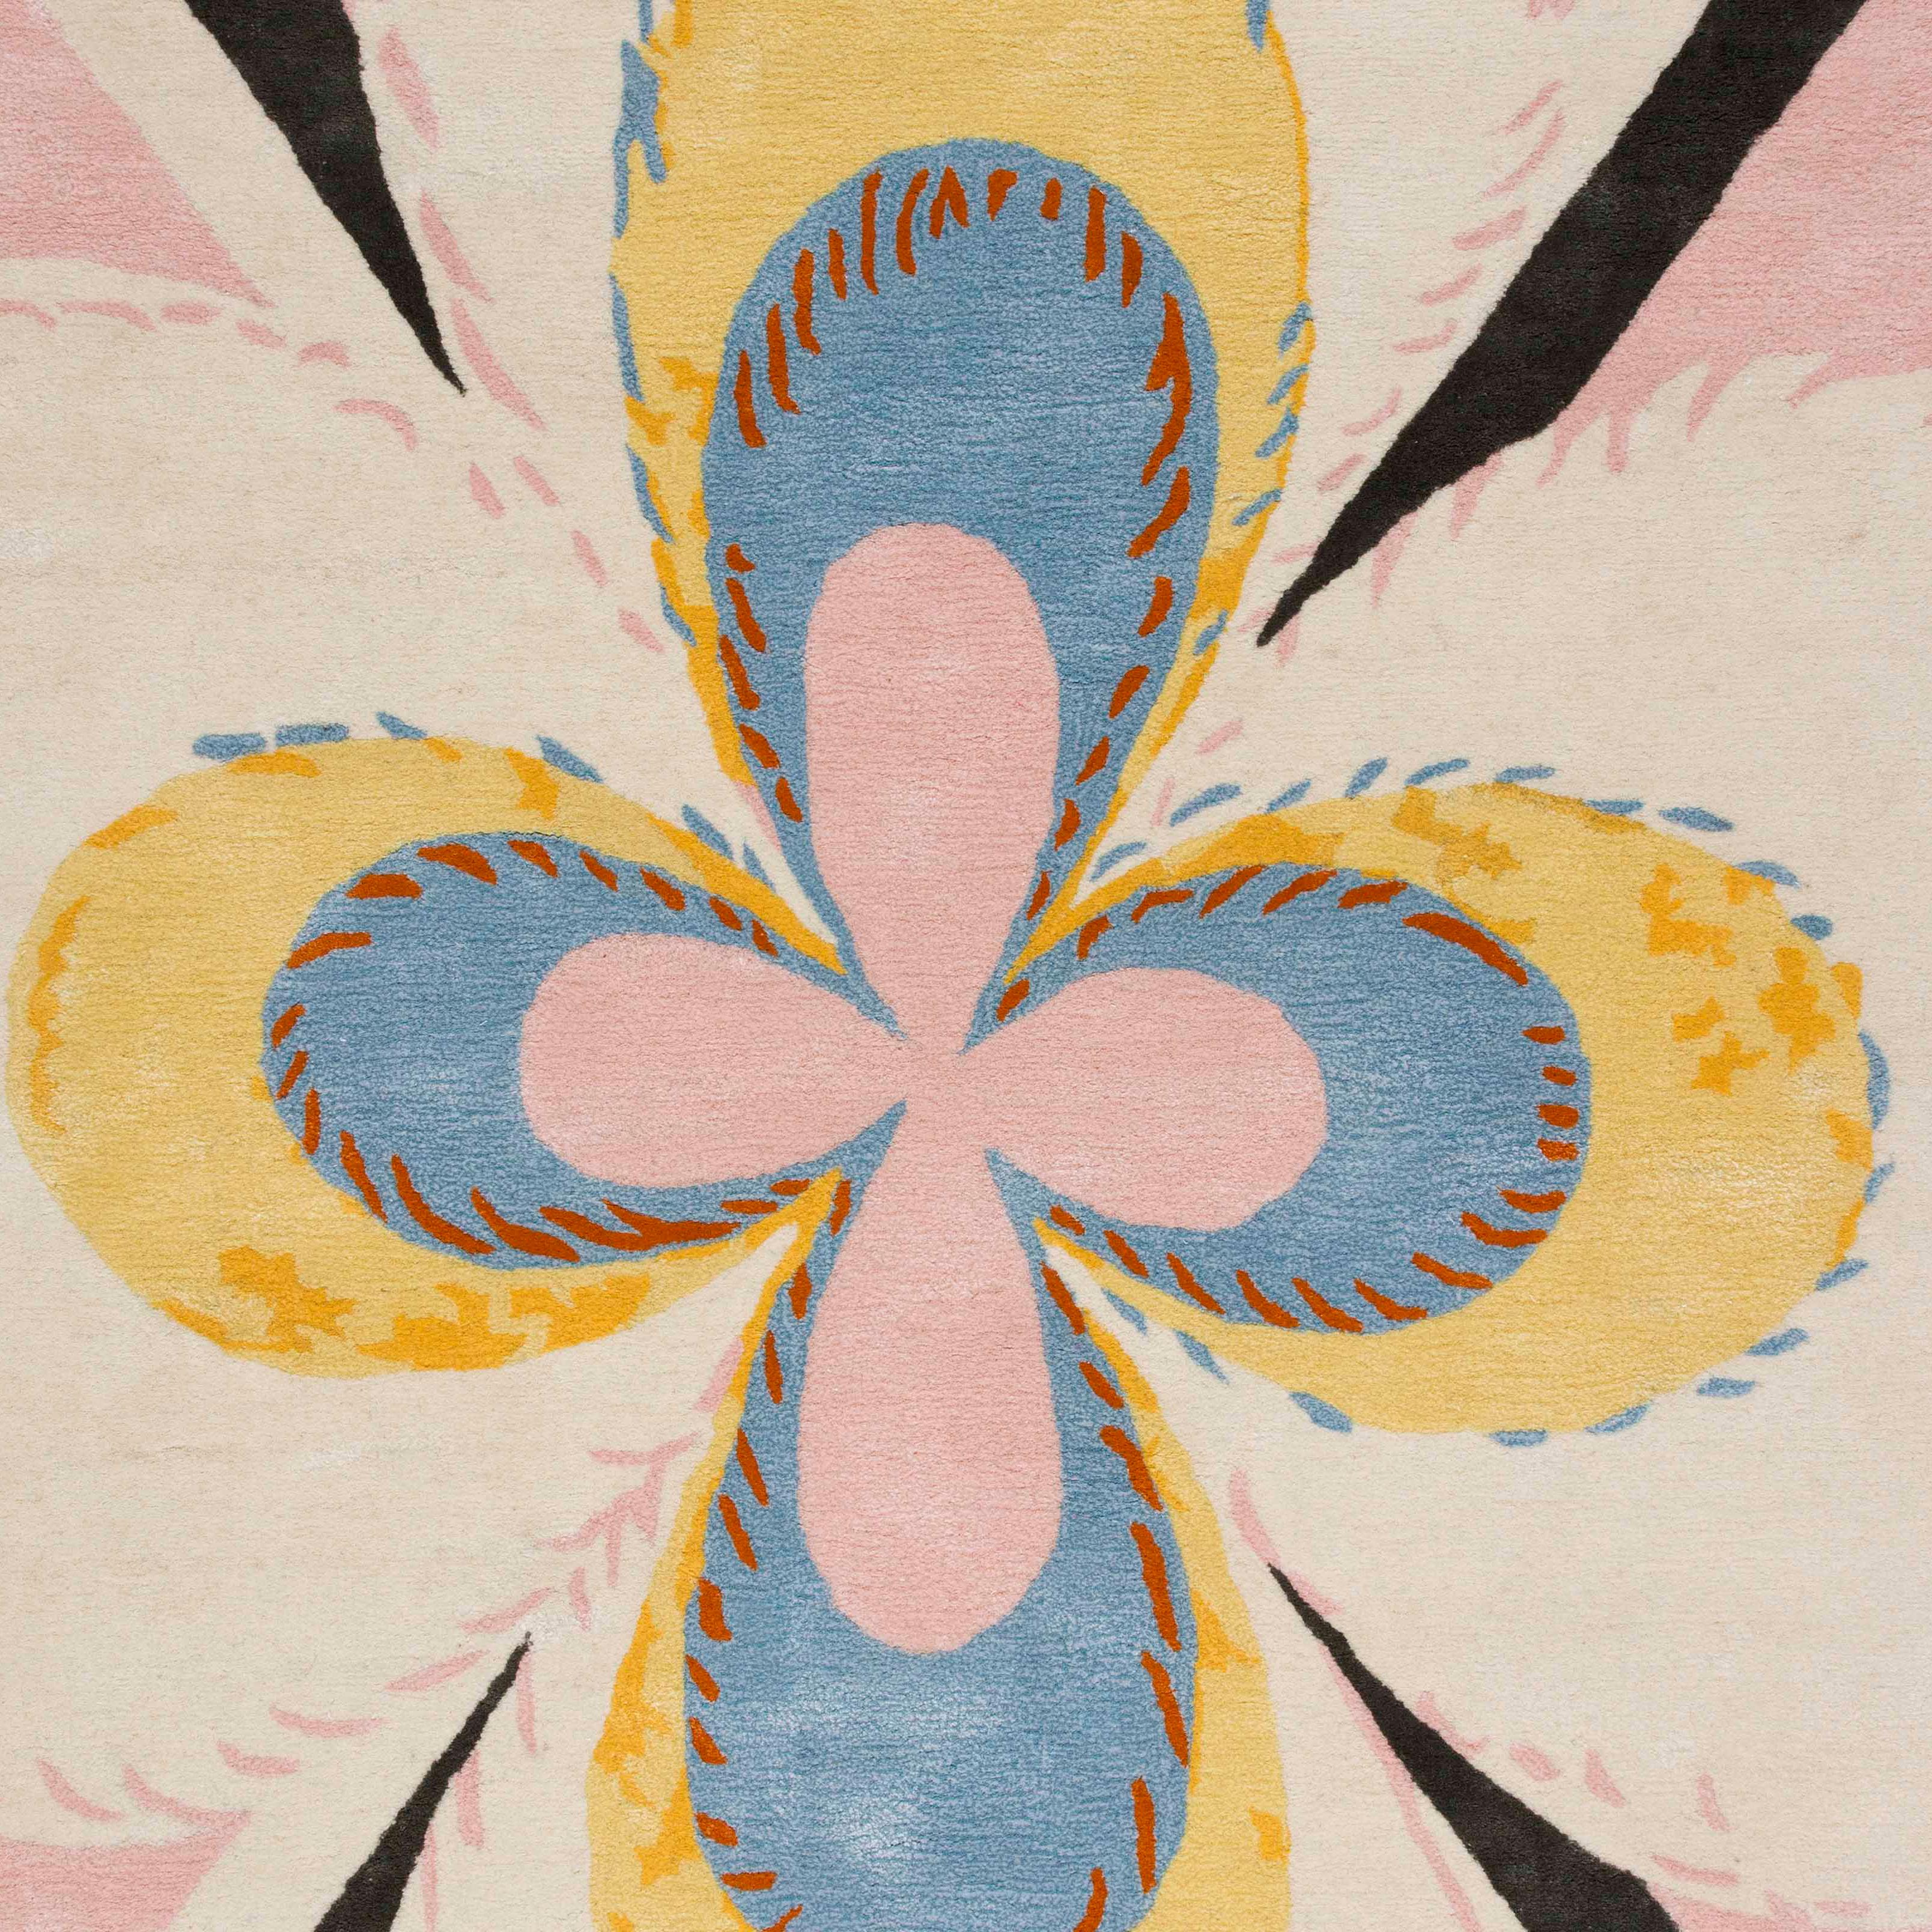 Group VII, Series US, no 7., 2018
50% New Zealand wool, 50% viscose. Hand tufted
Edition of 30

Hilma af Klint: The Temple Series Collection
Produced by Asplund in collaboration with the Hilma af Klint Foundation.

Her vision extended beyond the